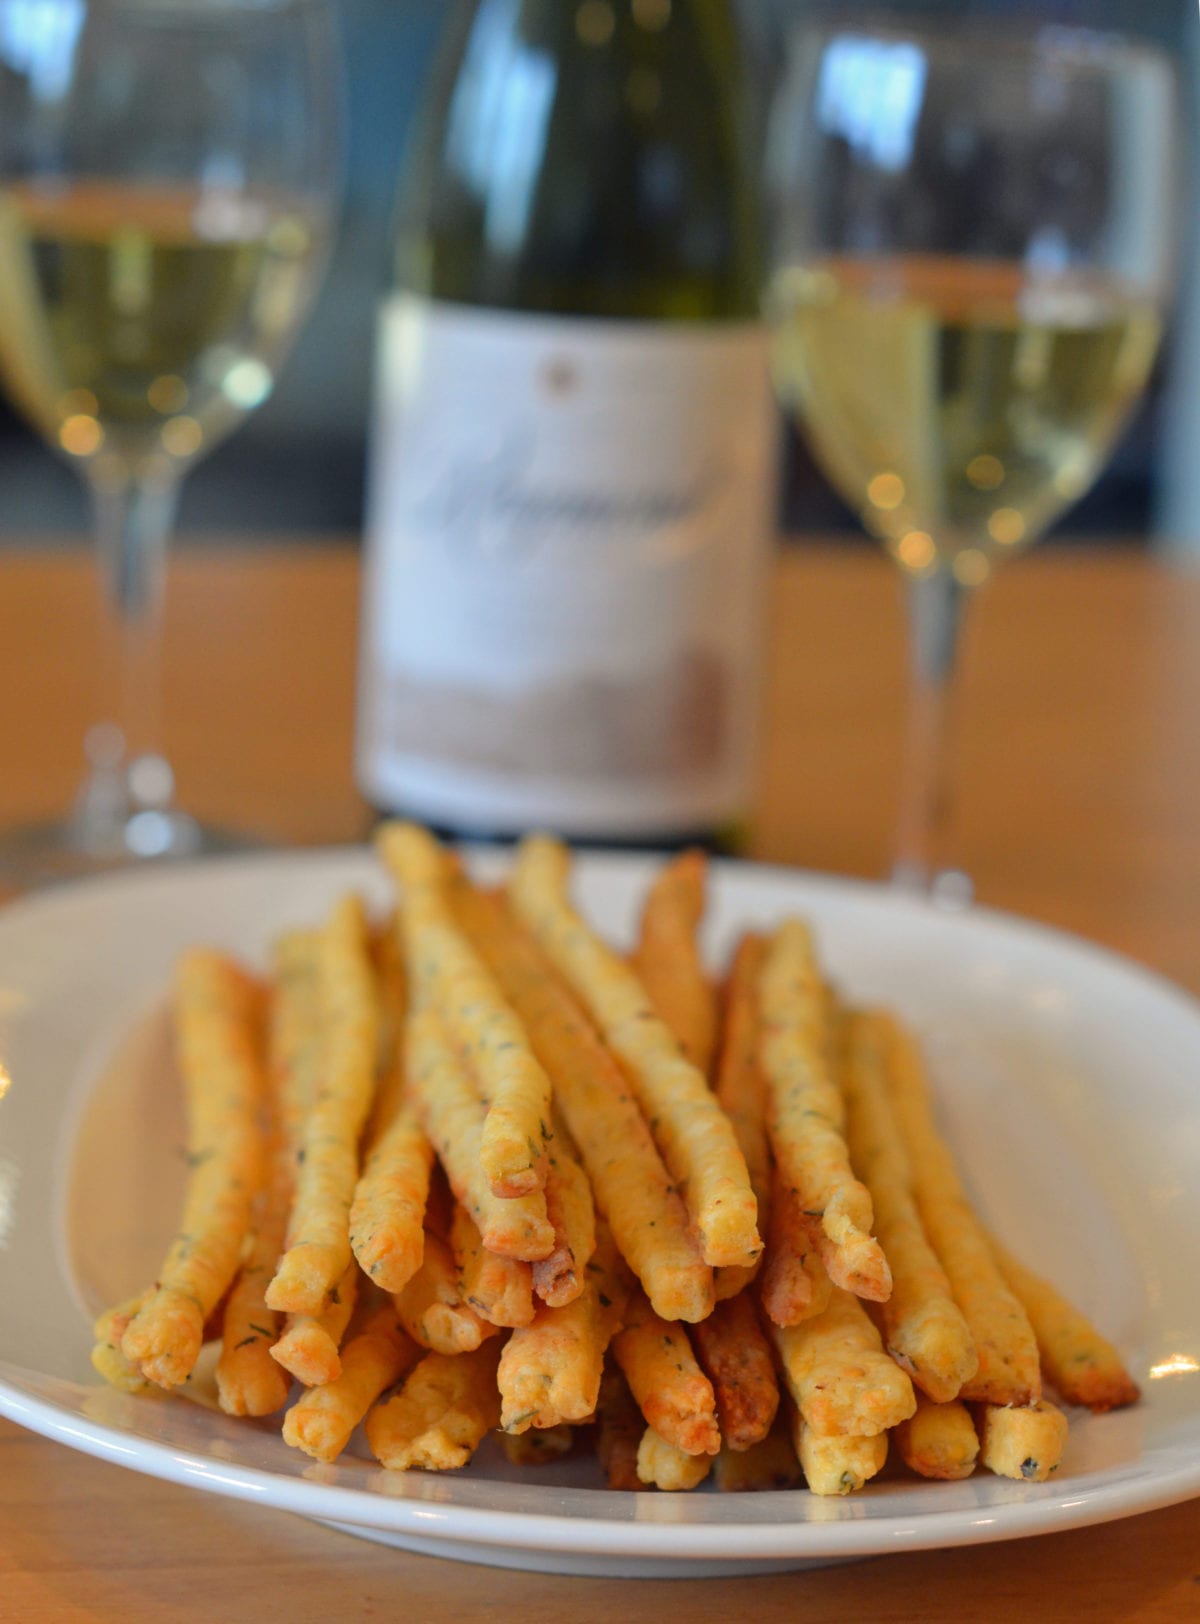 https://www.onceuponachef.com/images/2014/11/Cheddar-and-Herb-Cheese-Straws-with-Wine-1200x1624.jpg